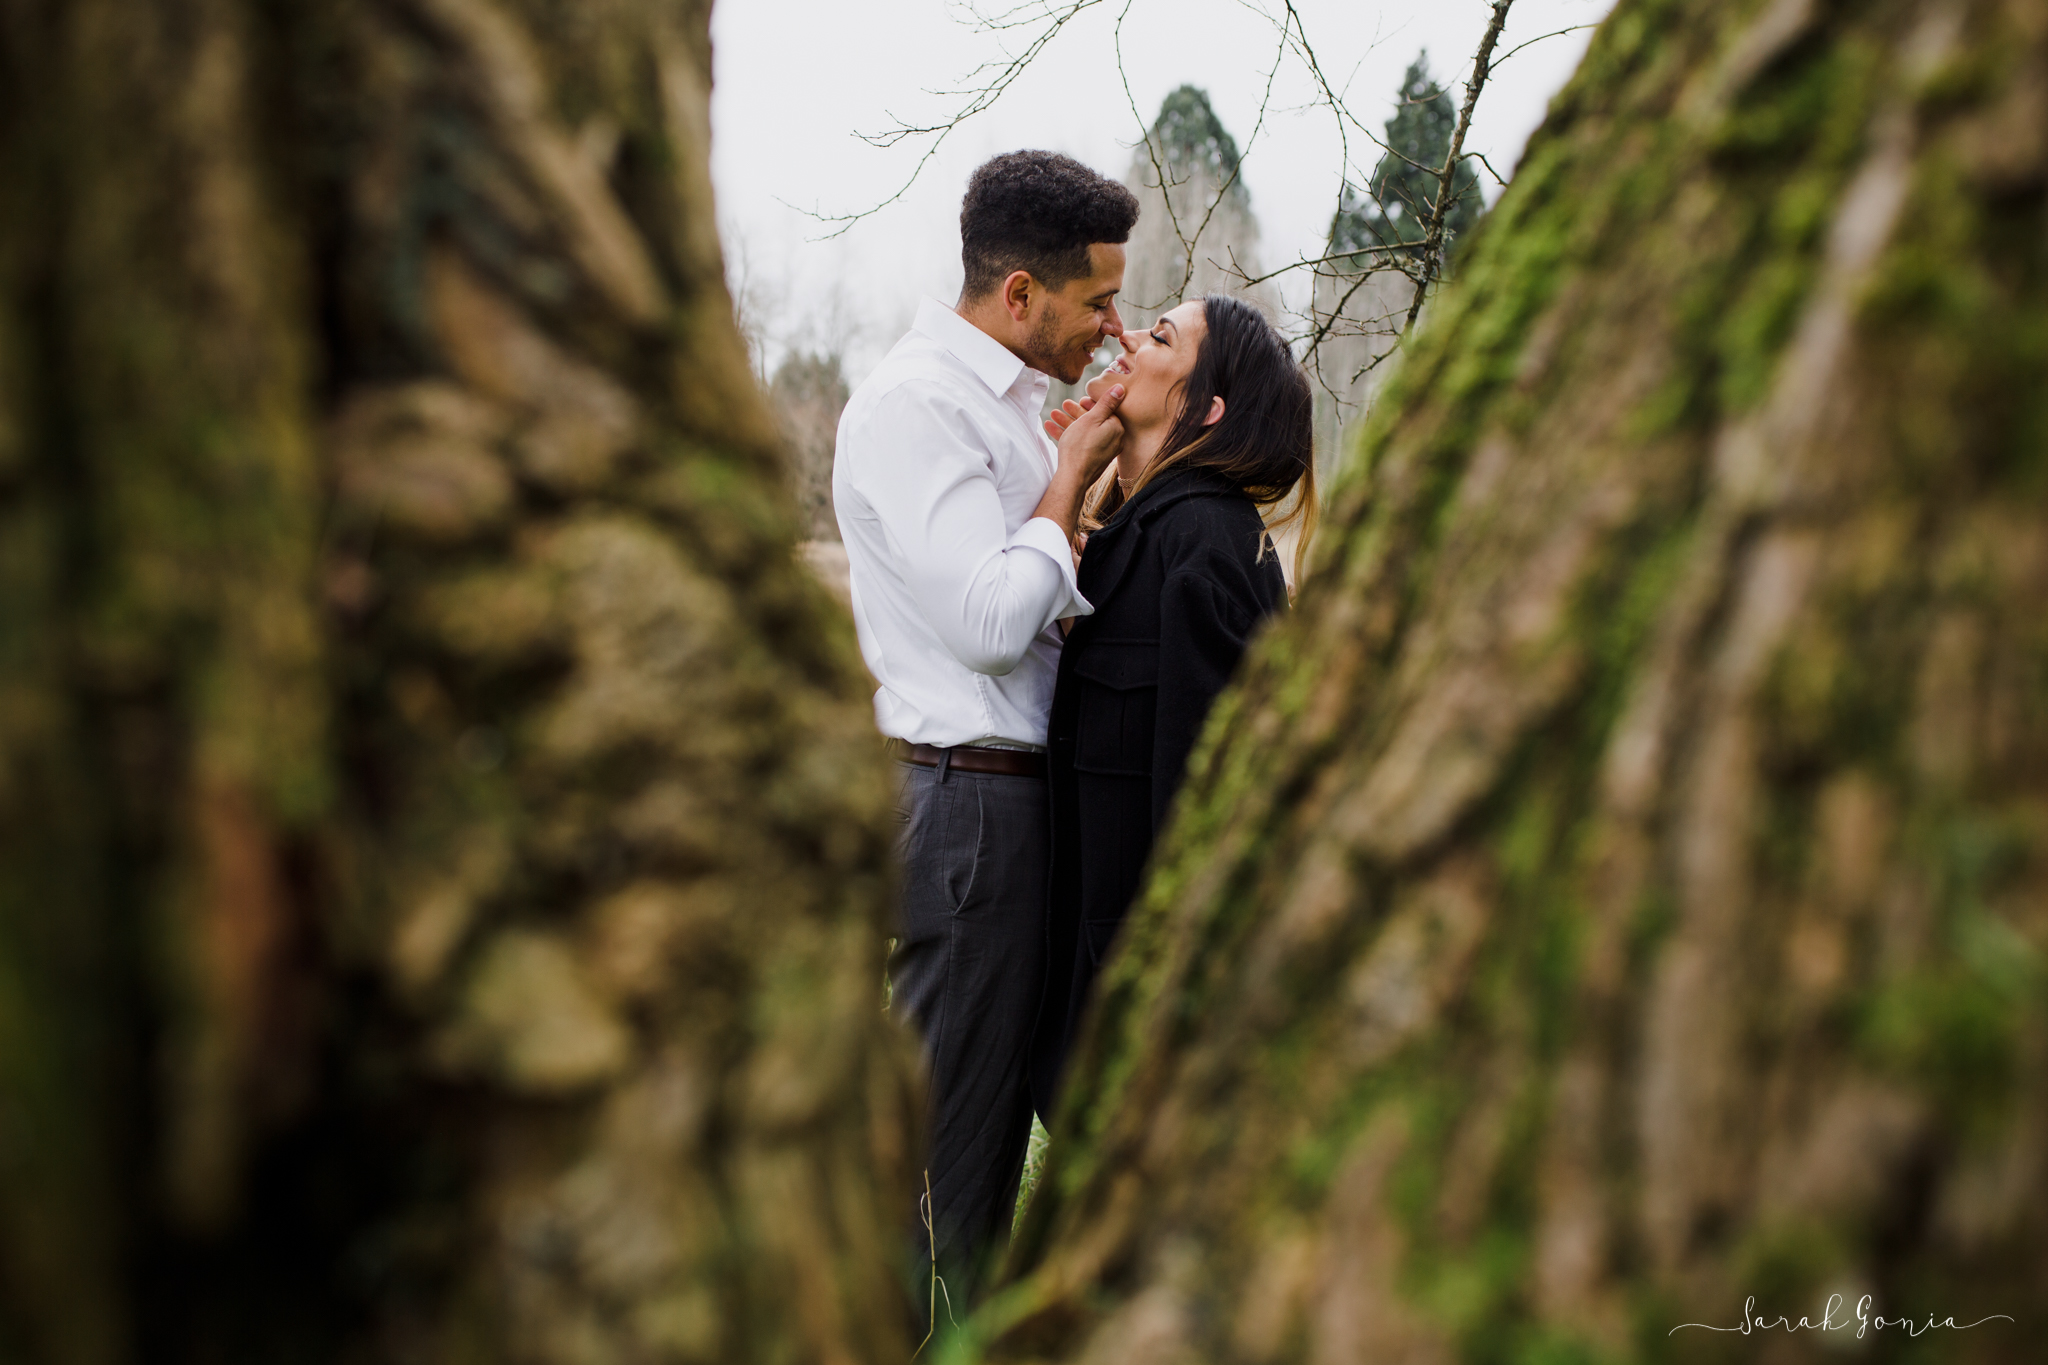 Olympia Photographer Engagement, Love Stories and Weddings Trees